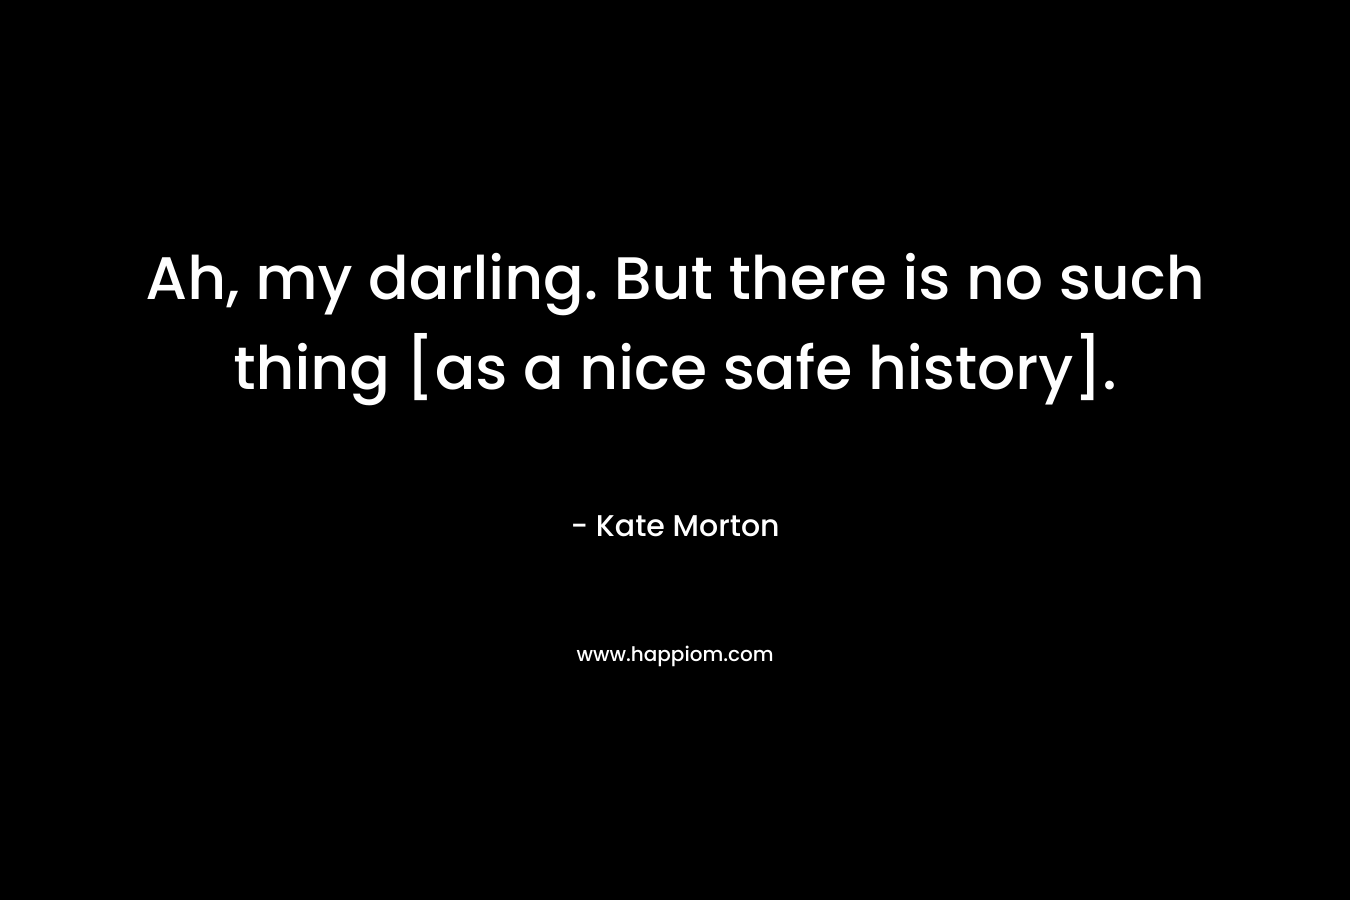 Ah, my darling. But there is no such thing [as a nice safe history].